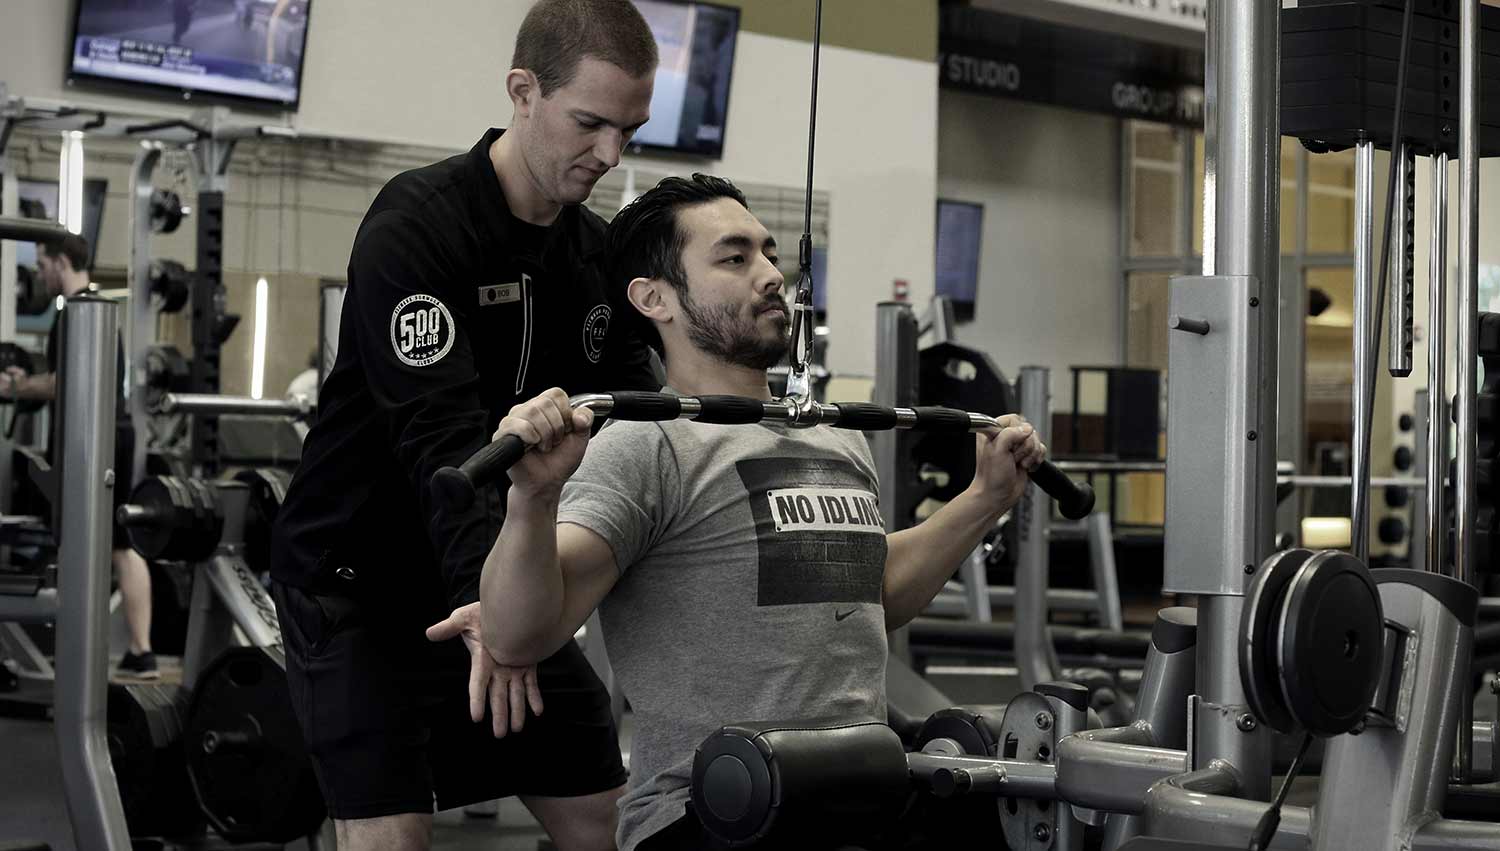 Personal trainer helping a member with their form.